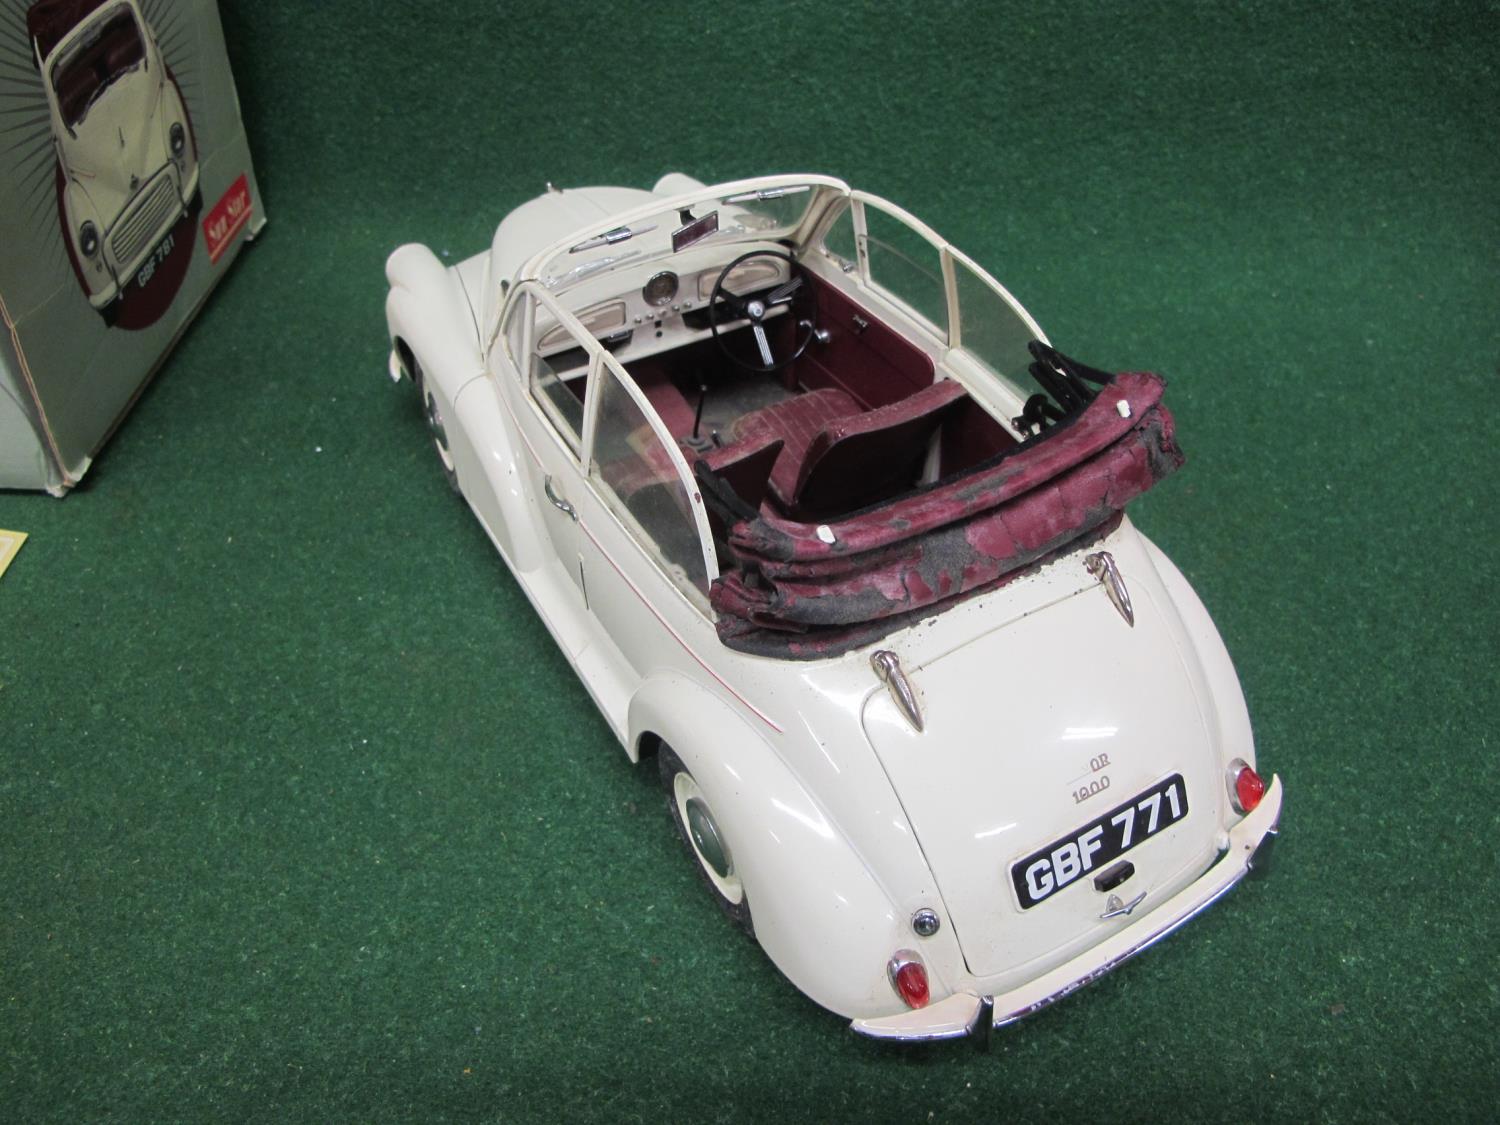 Boxed Sun Star 1:12 scale diecast model of a 1956 Morris Minor 1000 convertible in Old English White - Image 3 of 3